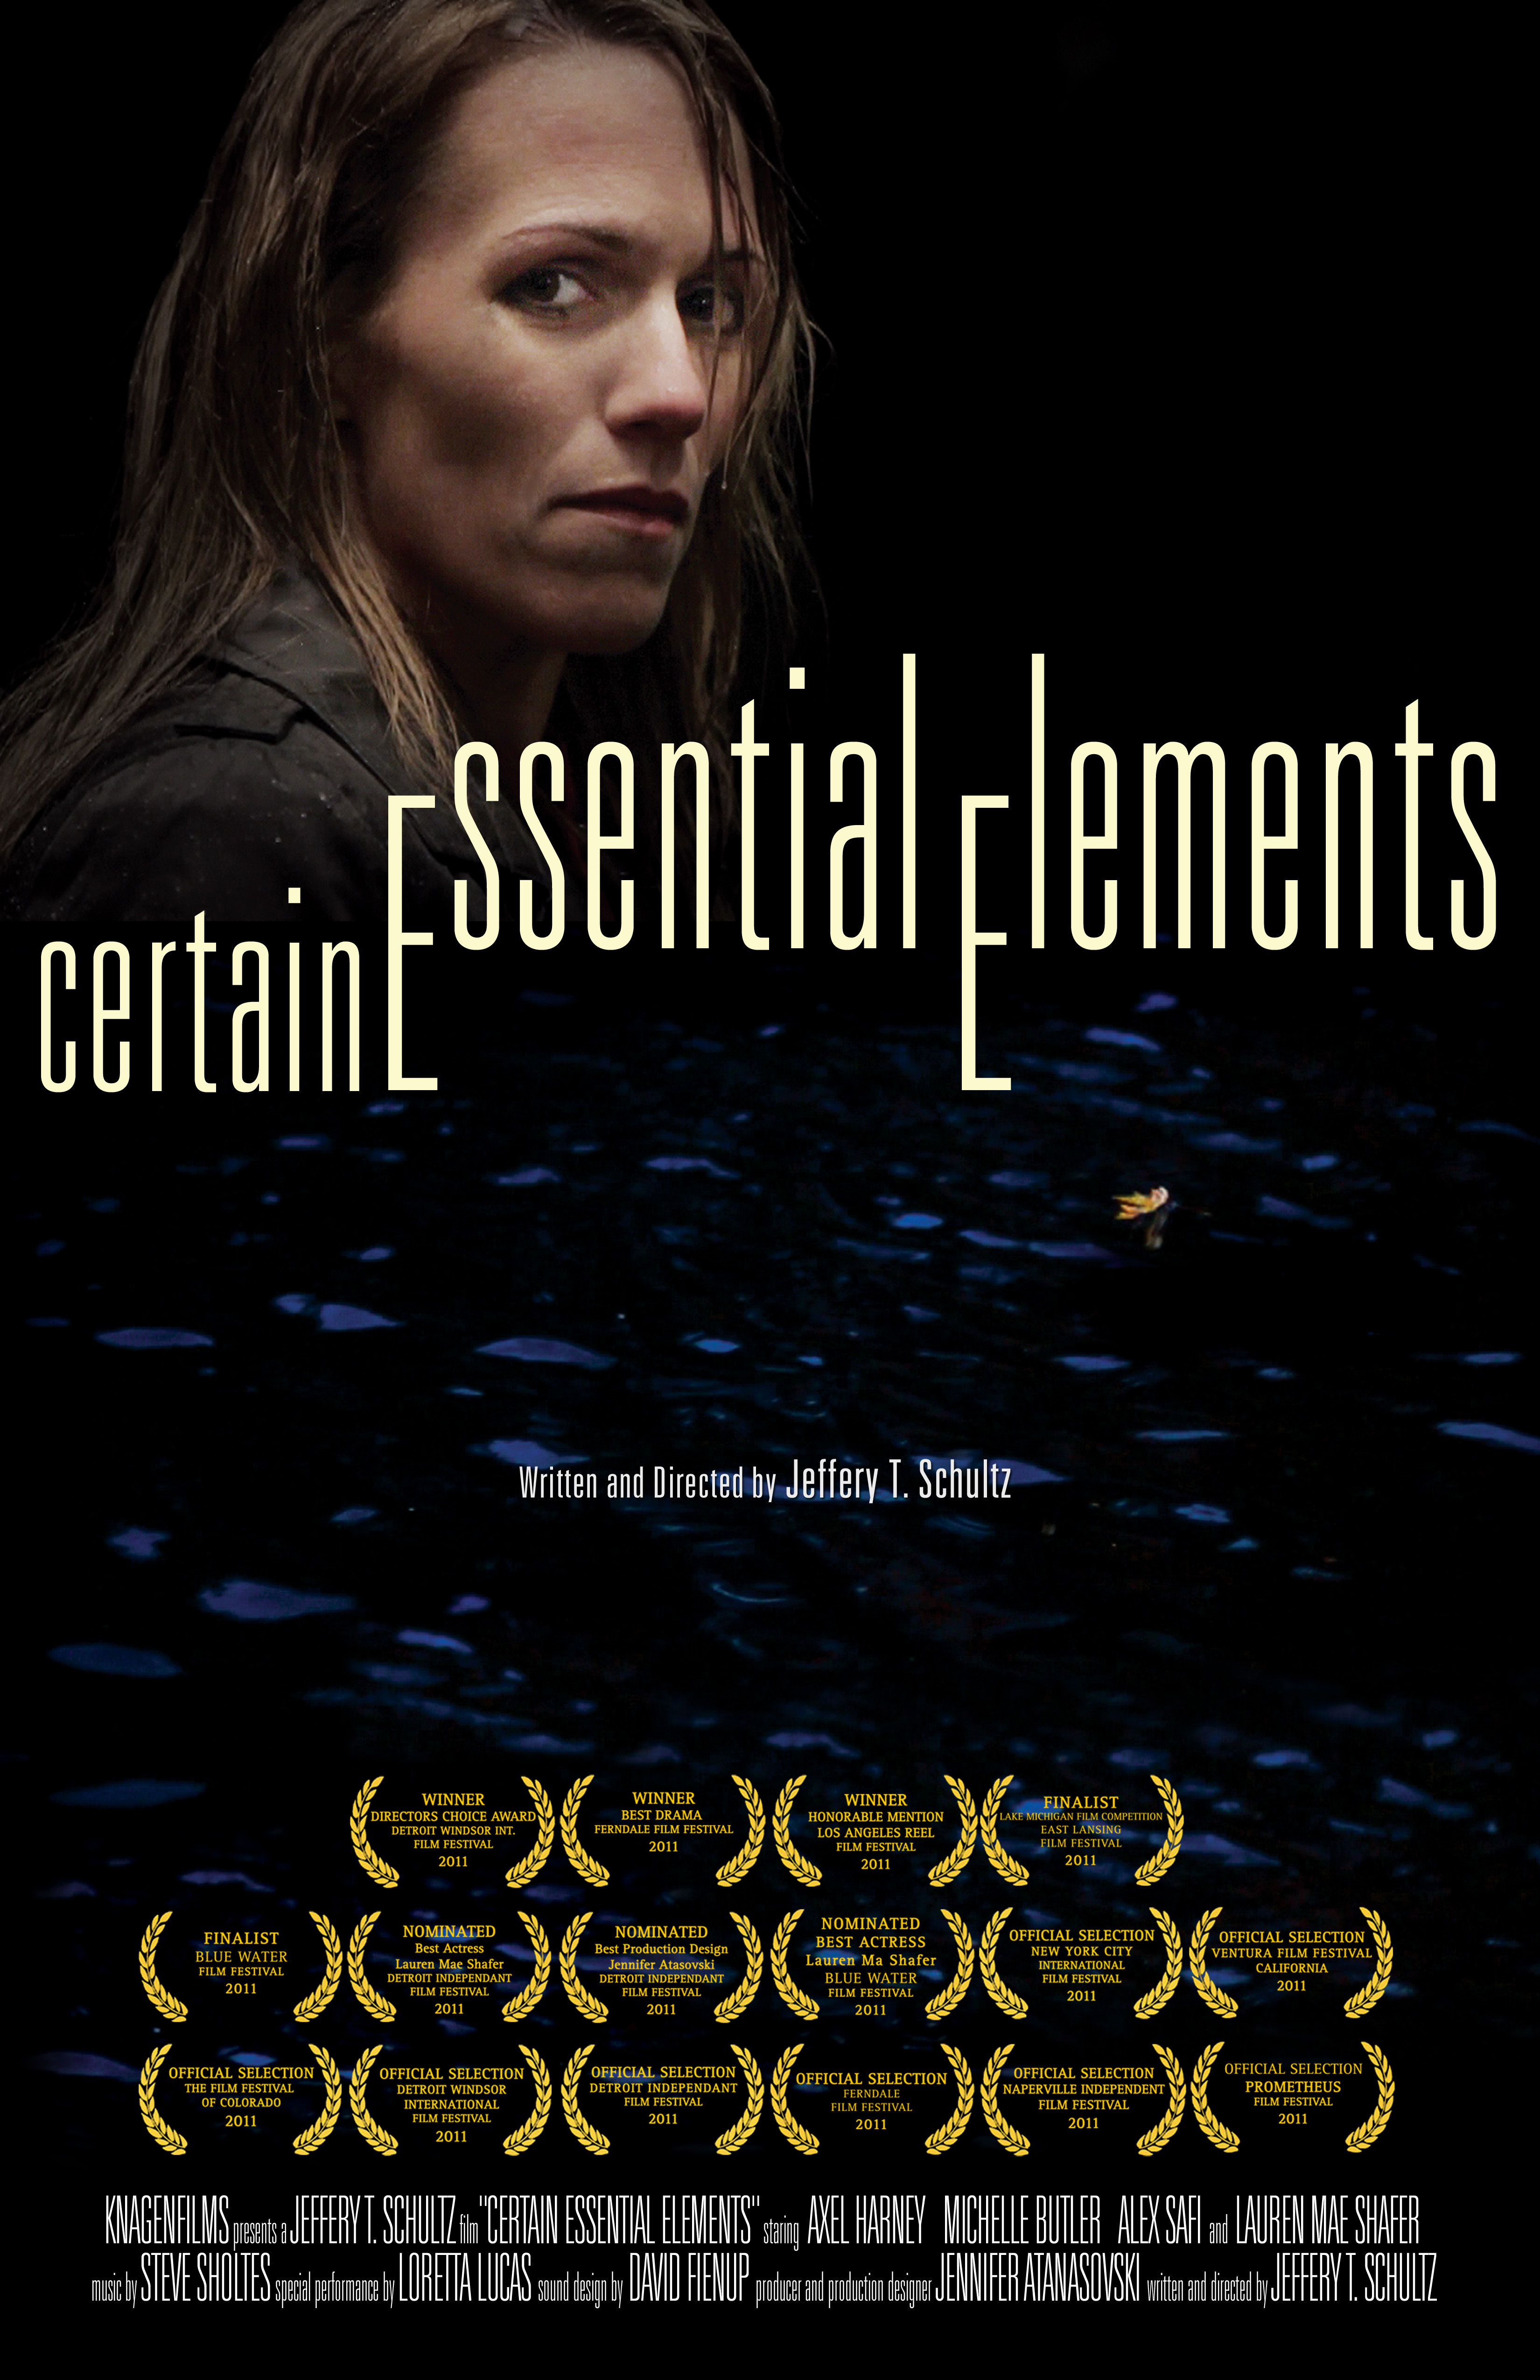 Certain Essential Elements Written and Directed by Jeffery T. Schultz